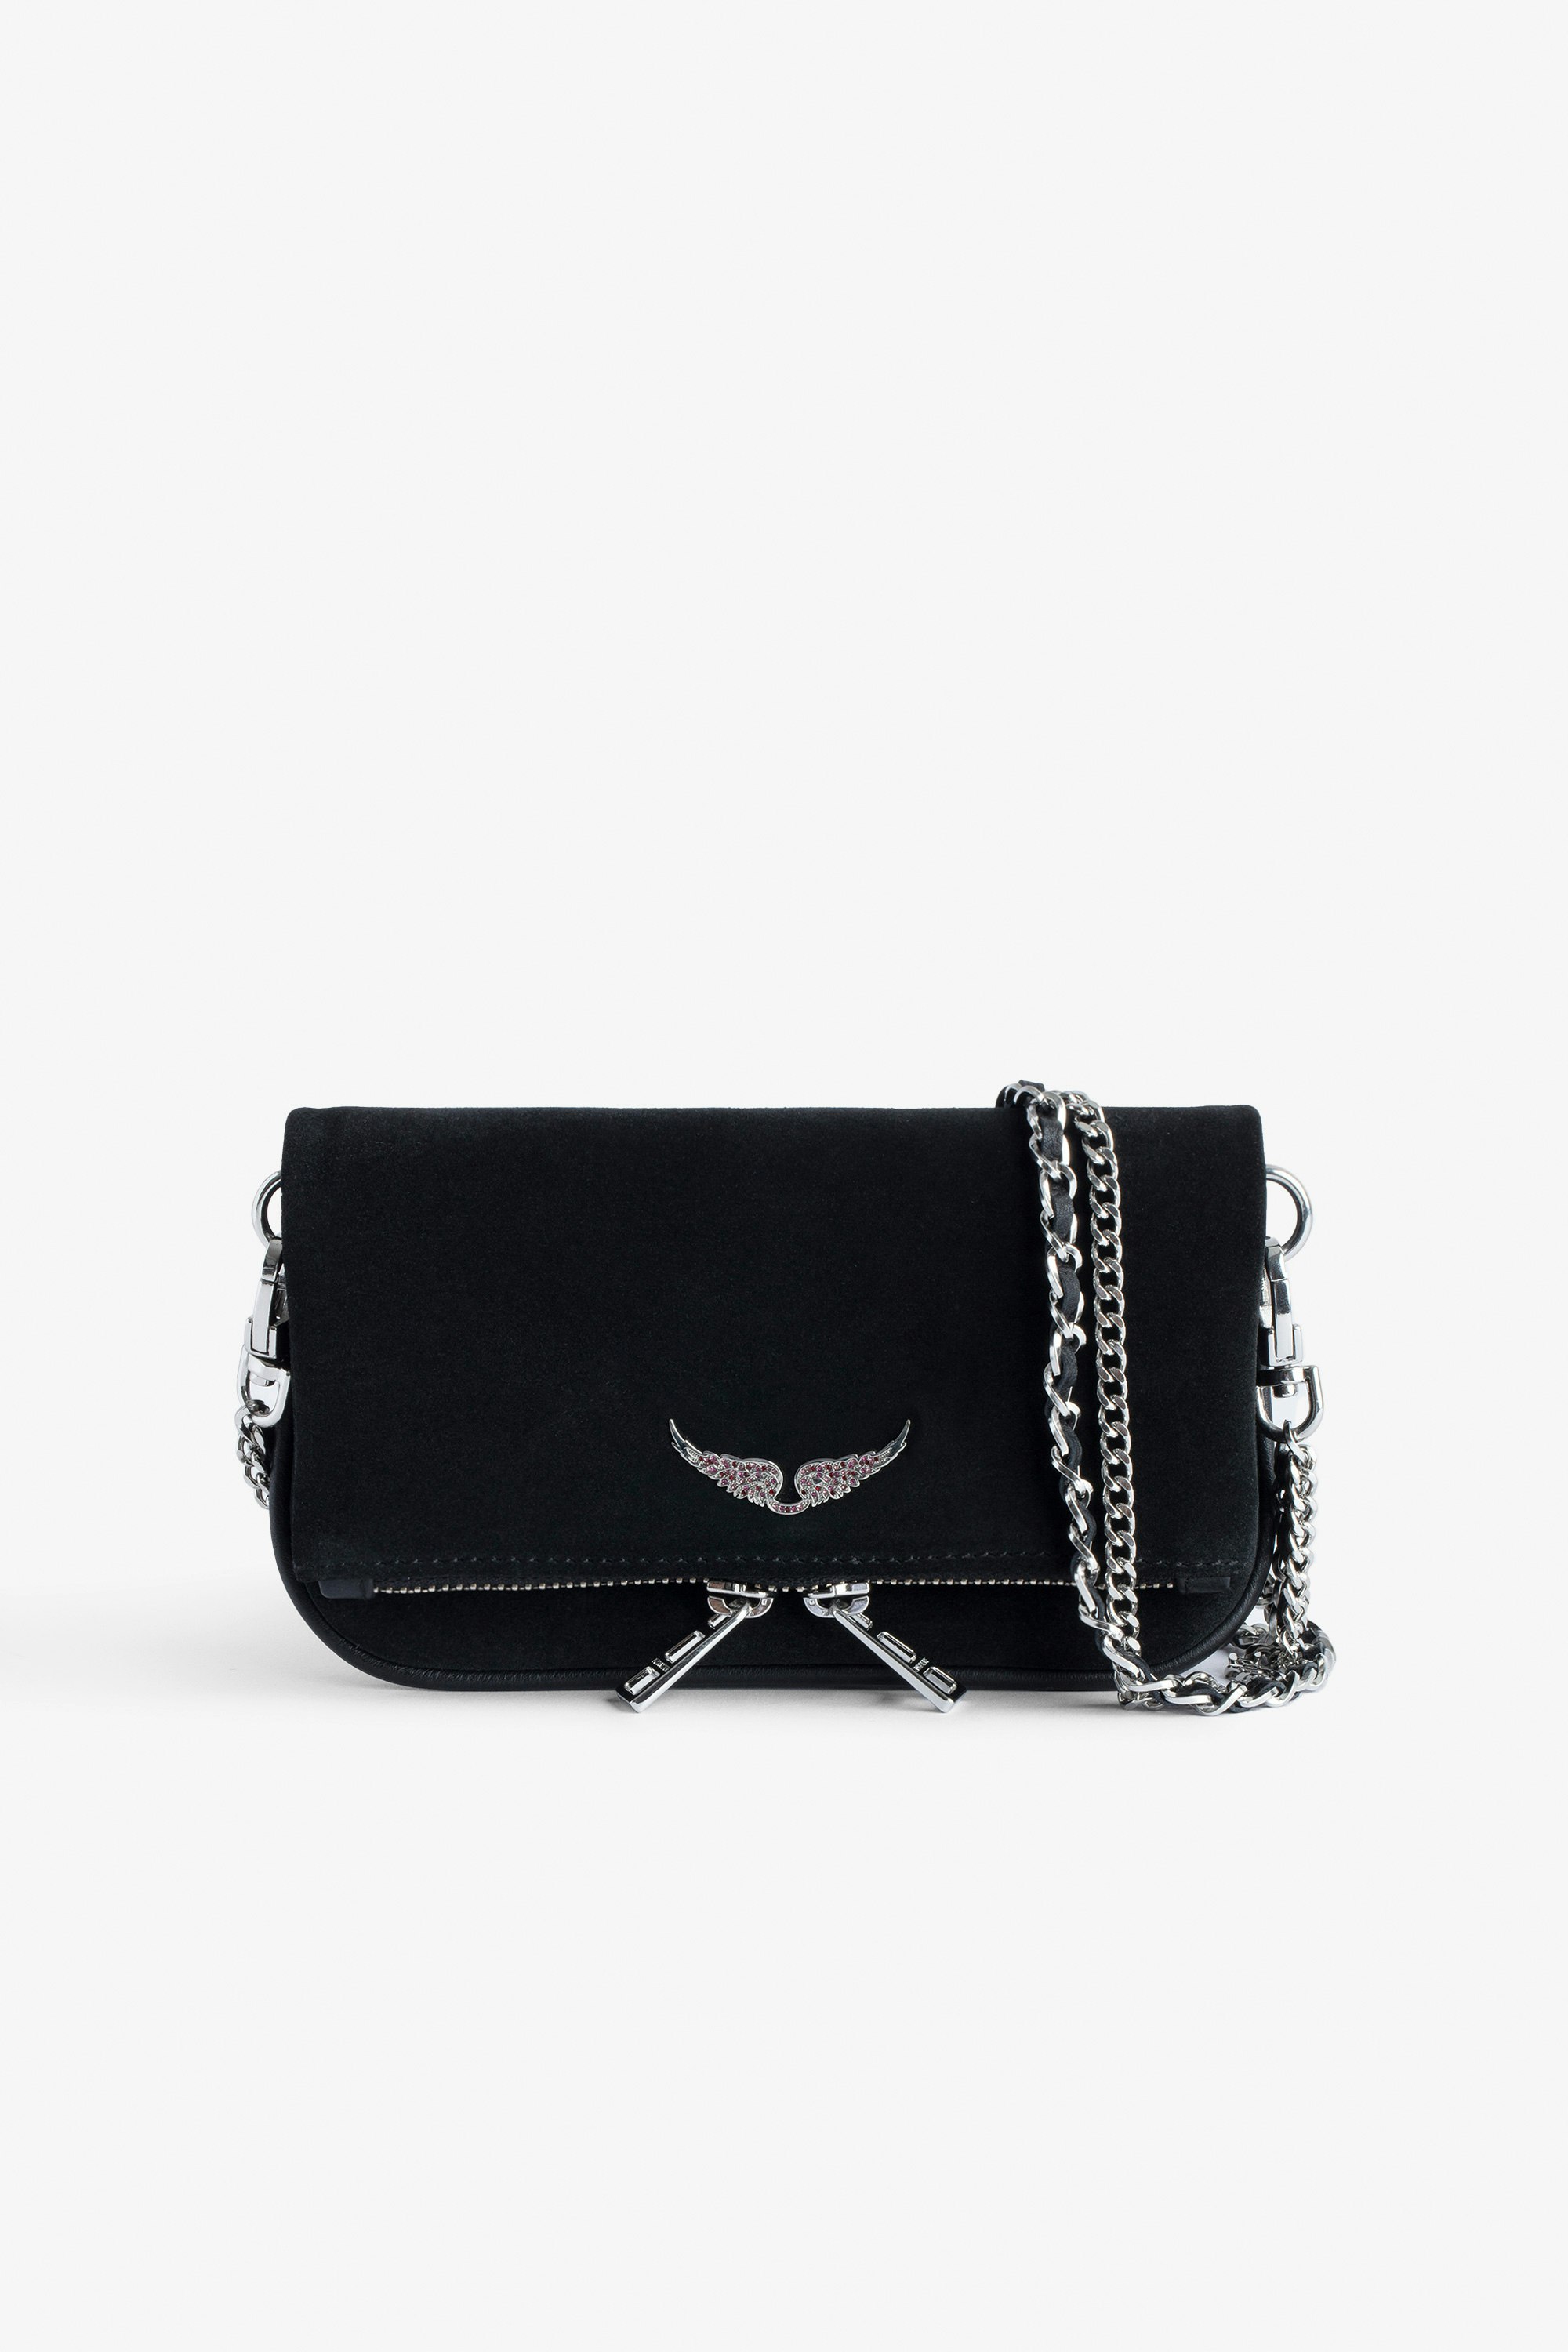 Rock Nano Suede Clutch - Small Rock Nano black suede clutch with double leather and metal chain strap.